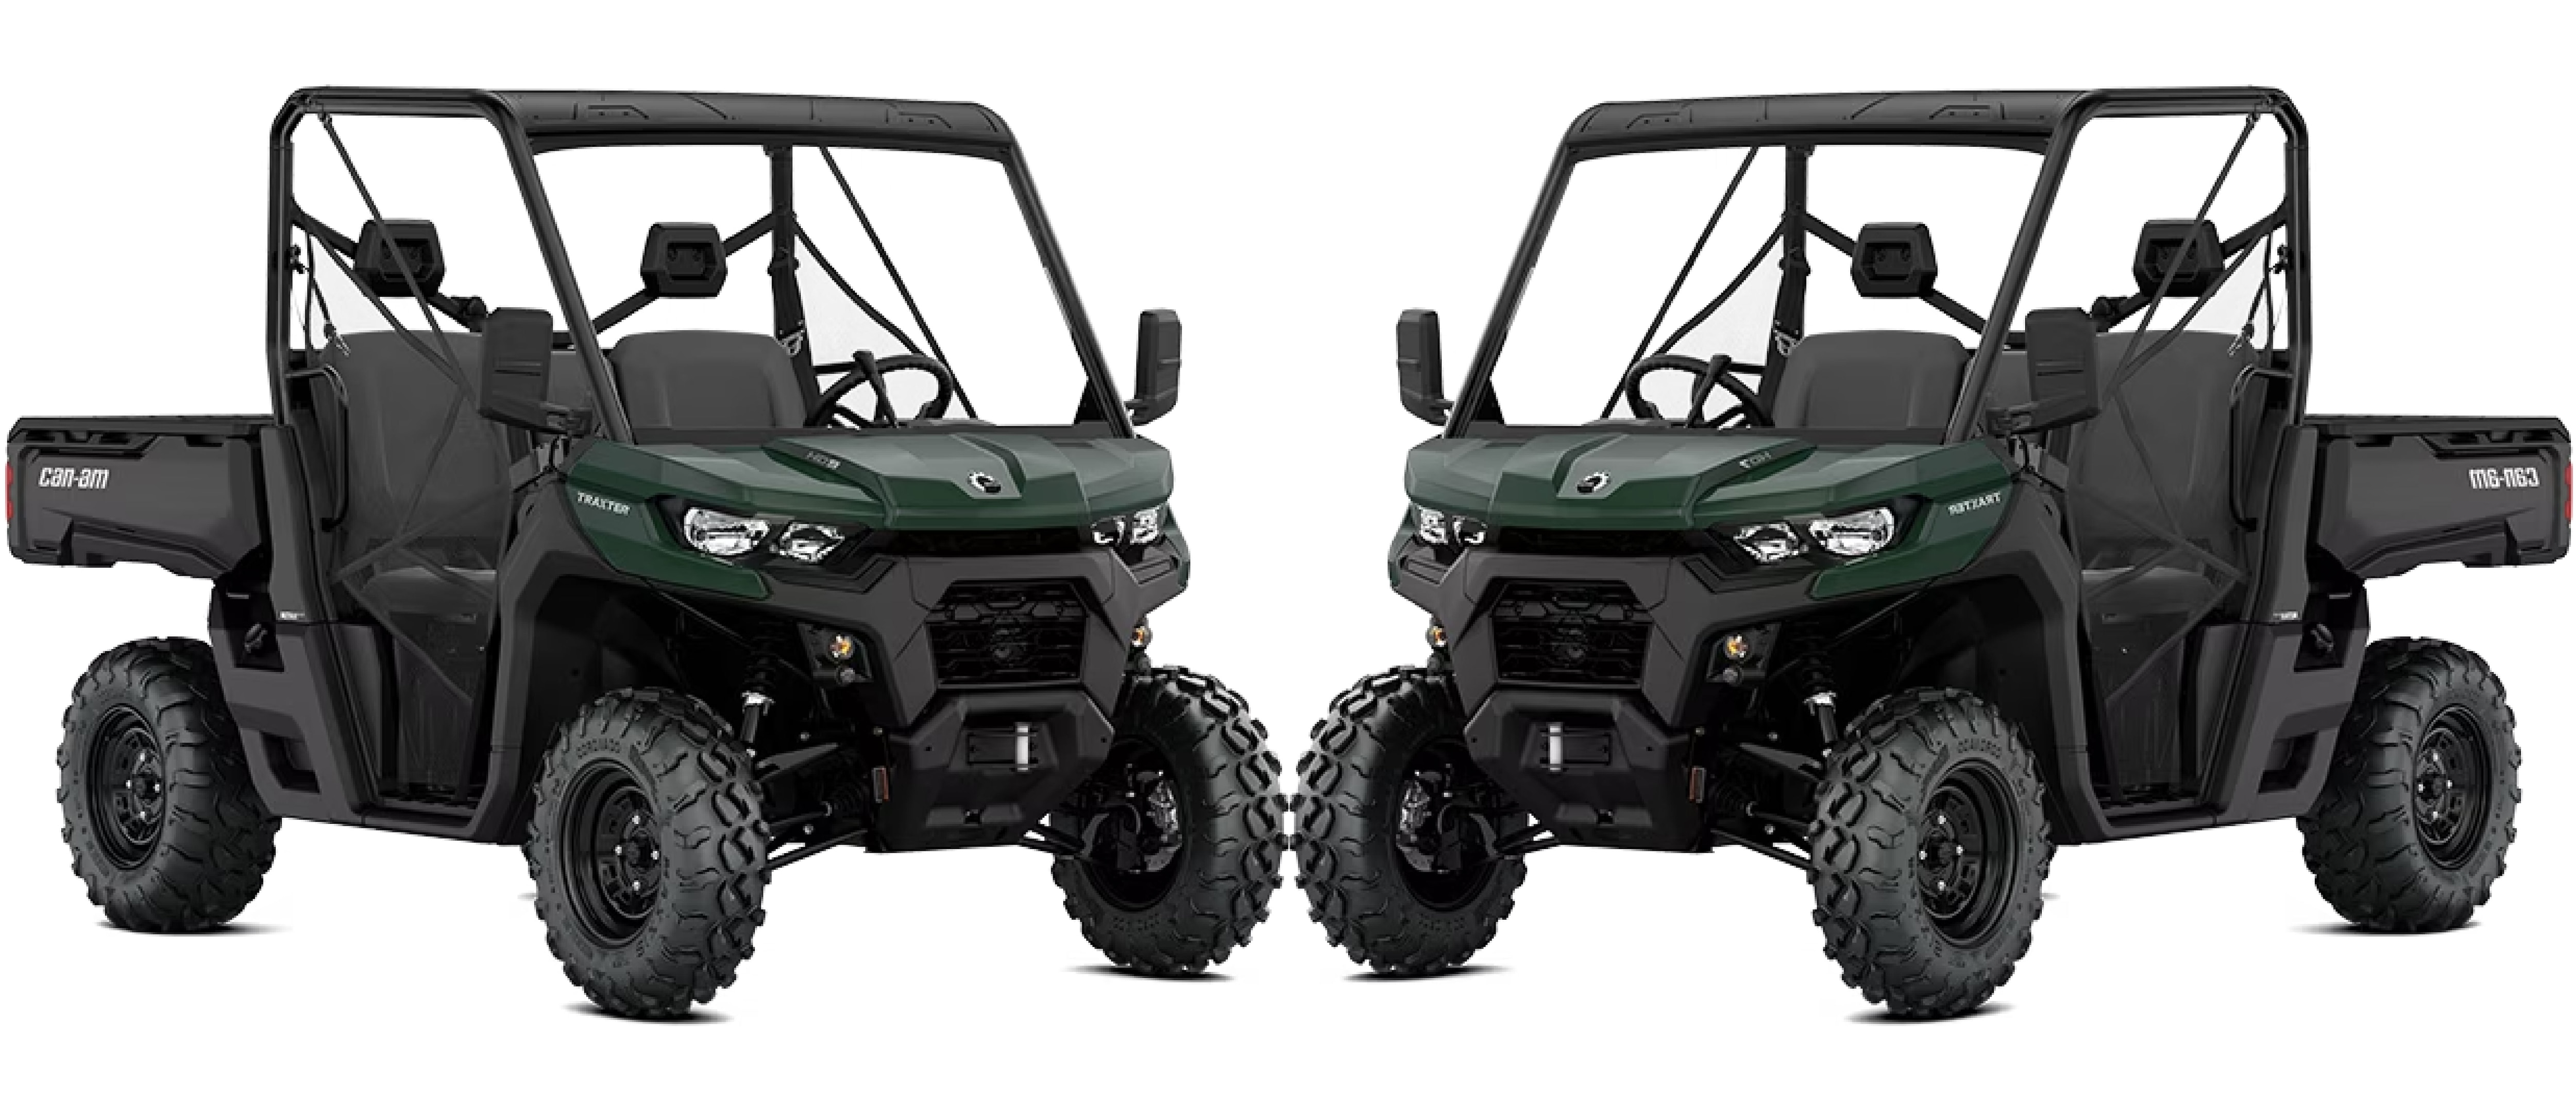 Revving Up Excitement: Waterworld's Open Day Will Introduce the All New Can-Am ATV Models HD7 and HD5